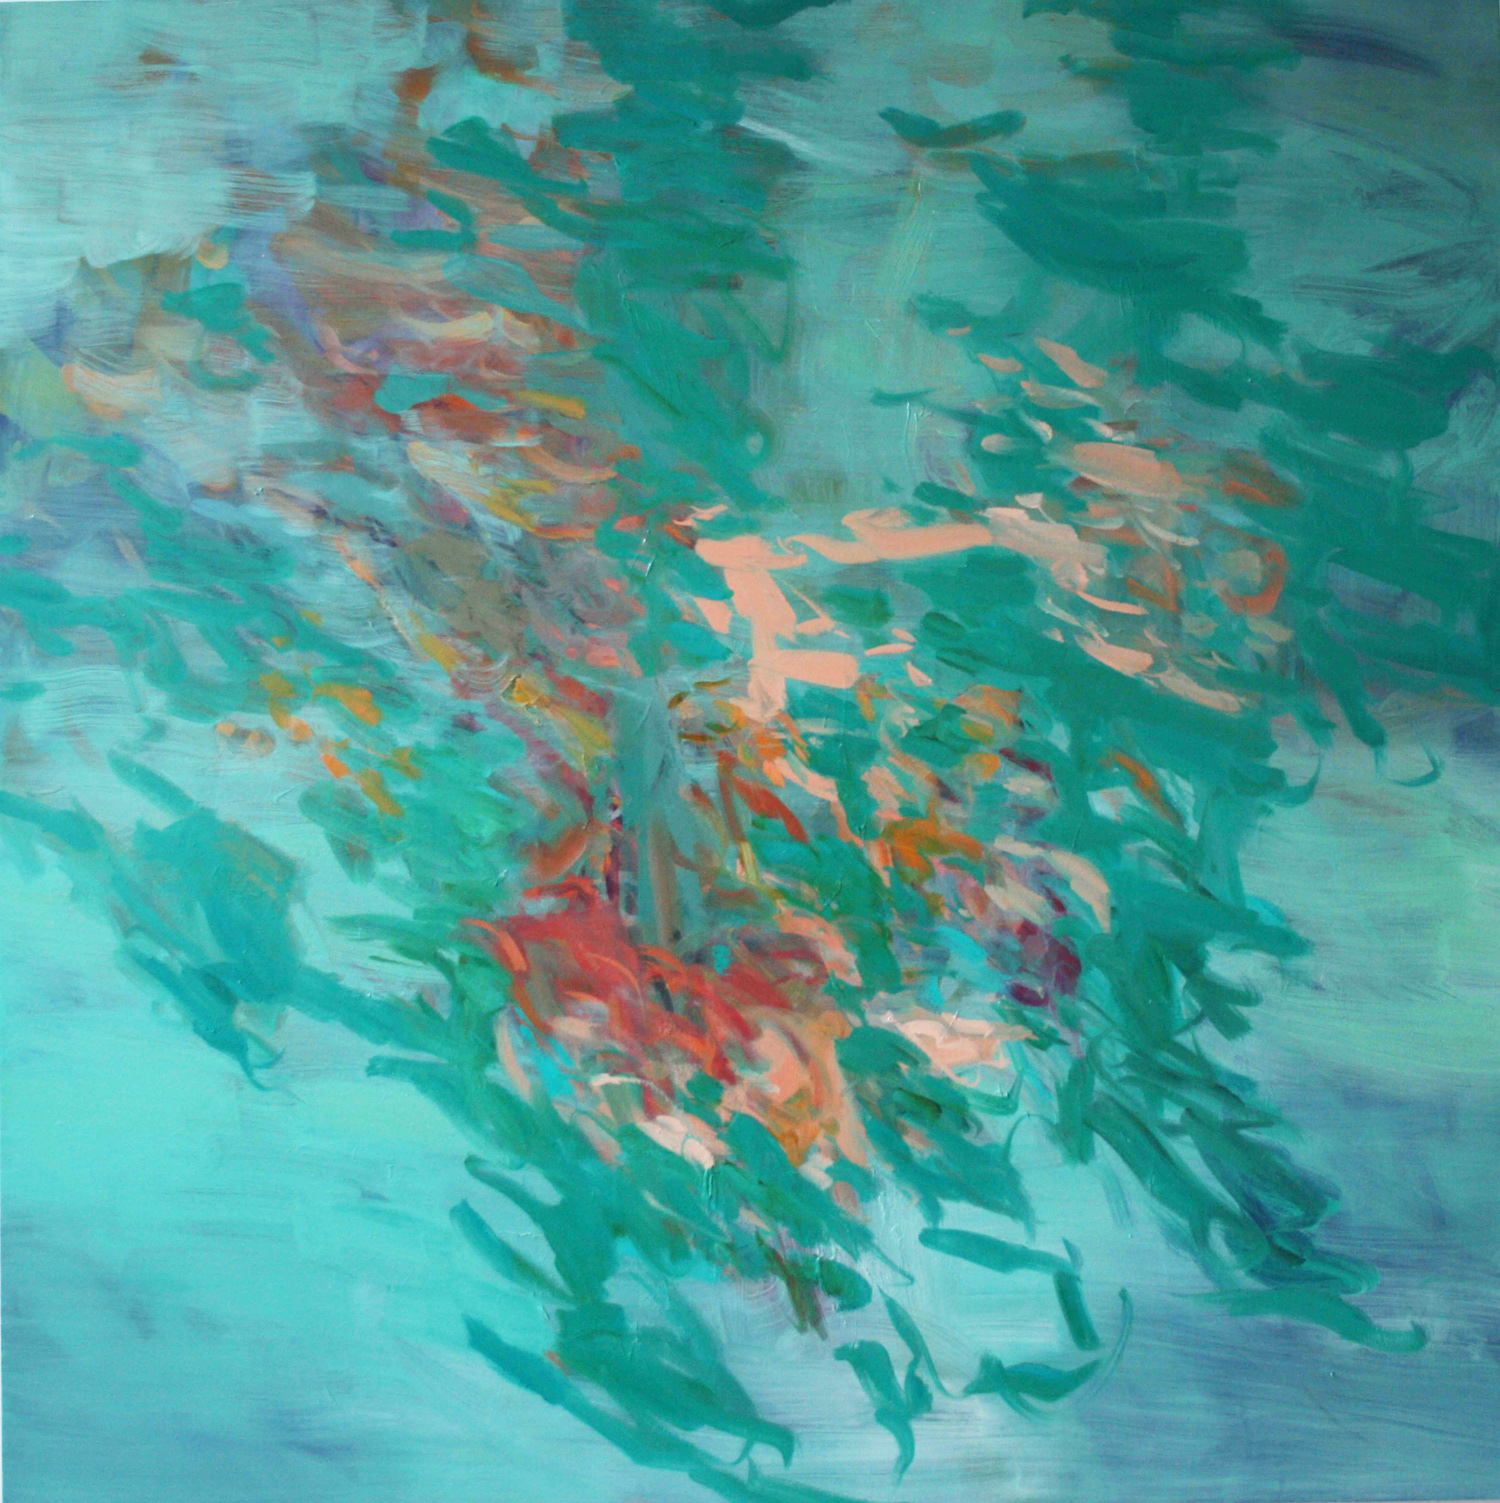  Untitled  (turquoise-pink)  2016  oil on canvas  145 x 145 cm       